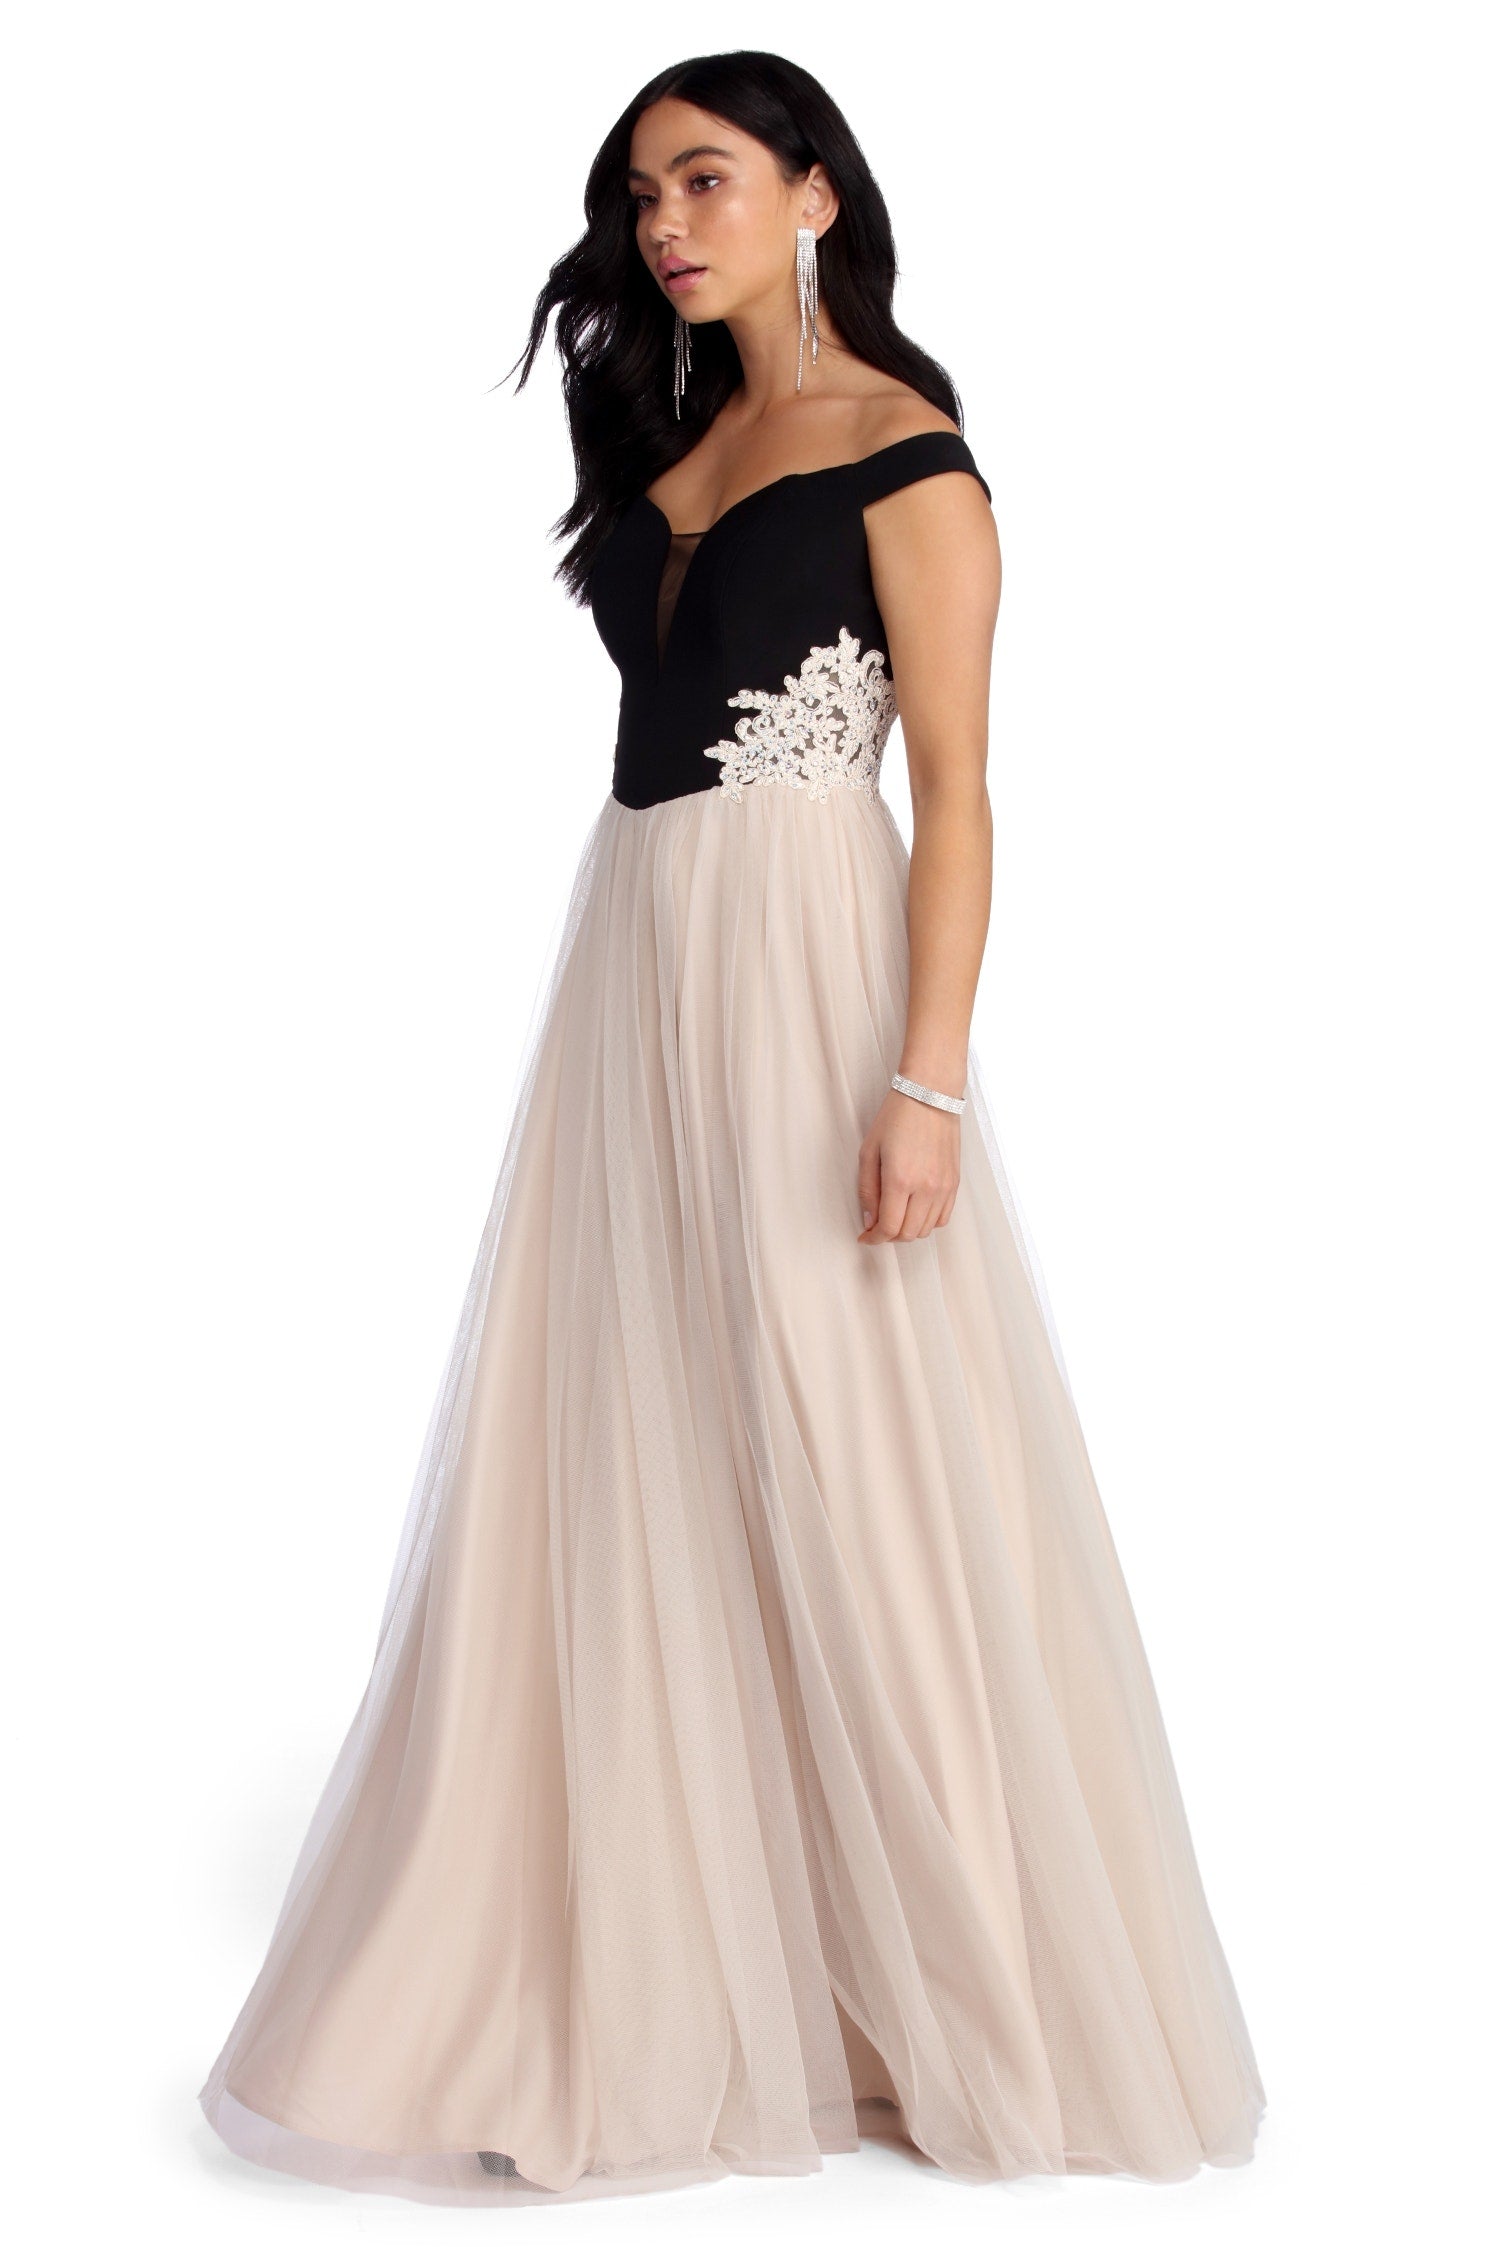 Cora Formal Tulle Ball Gown